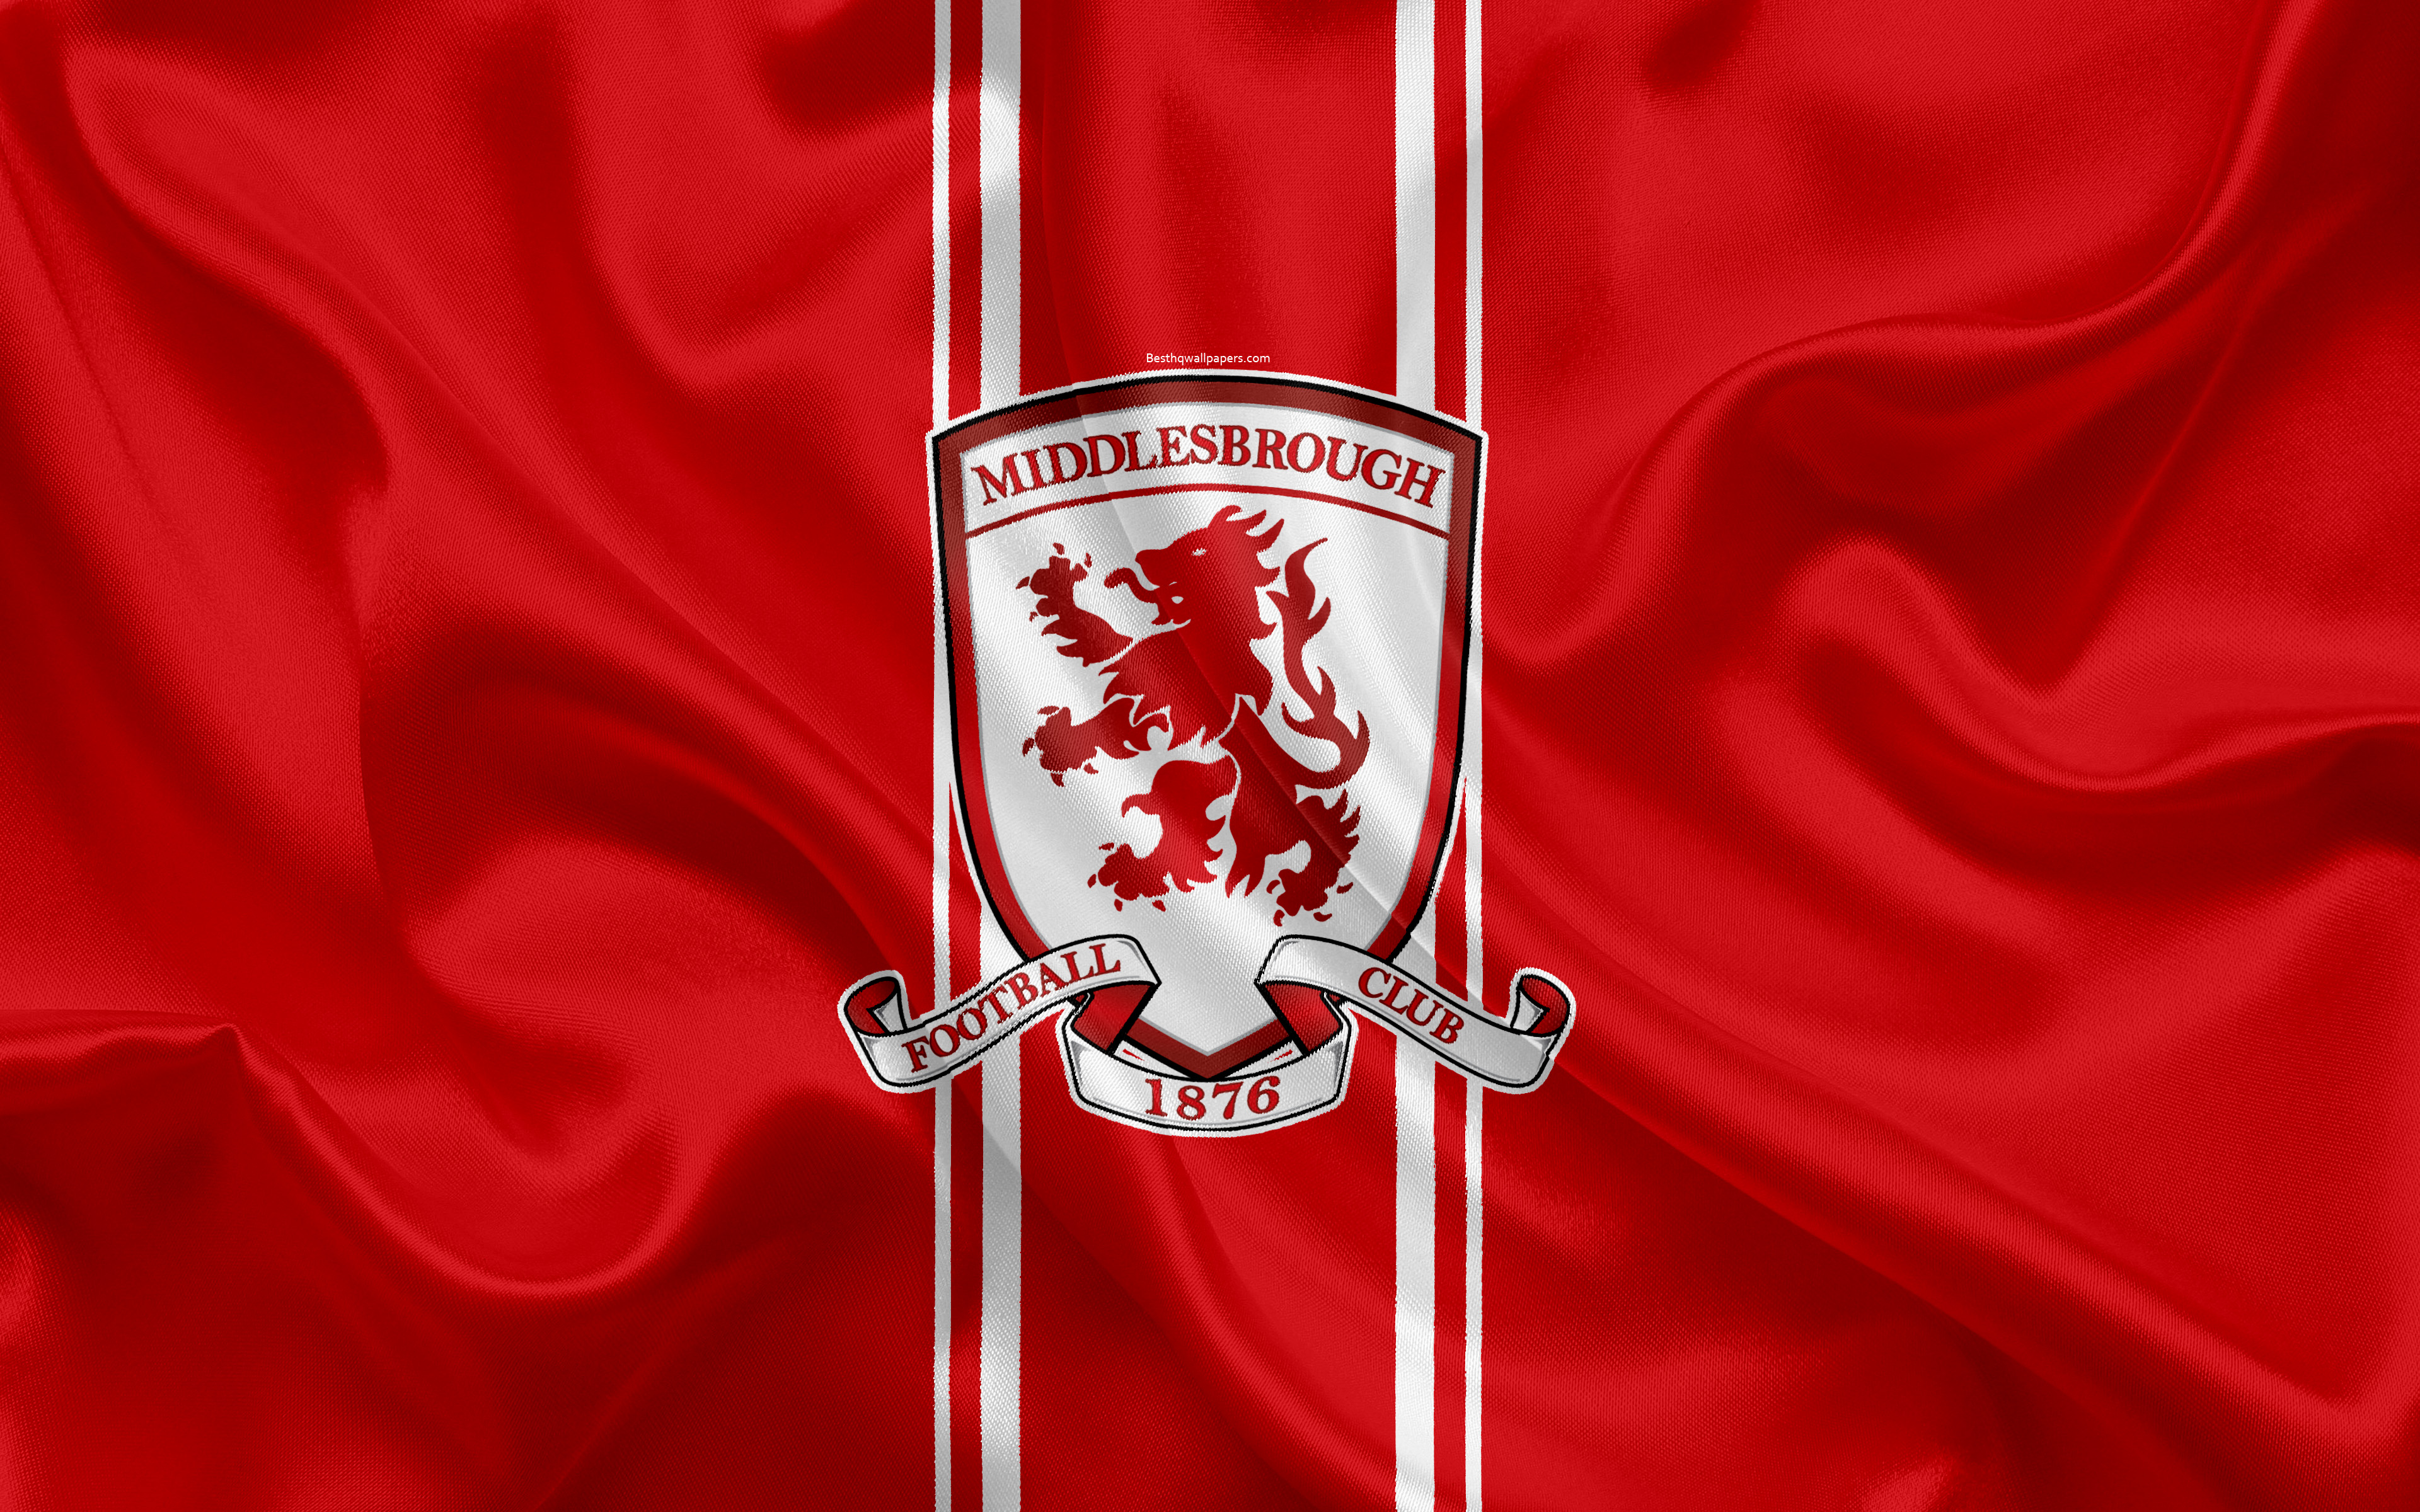 Download wallpaper Middlesbrough FC, silk flag, emblem, logo, 4k, Middlesbrough, UK, English football club, Football League Championship, Second League, football for desktop with resolution 3840x2400. High Quality HD picture wallpaper